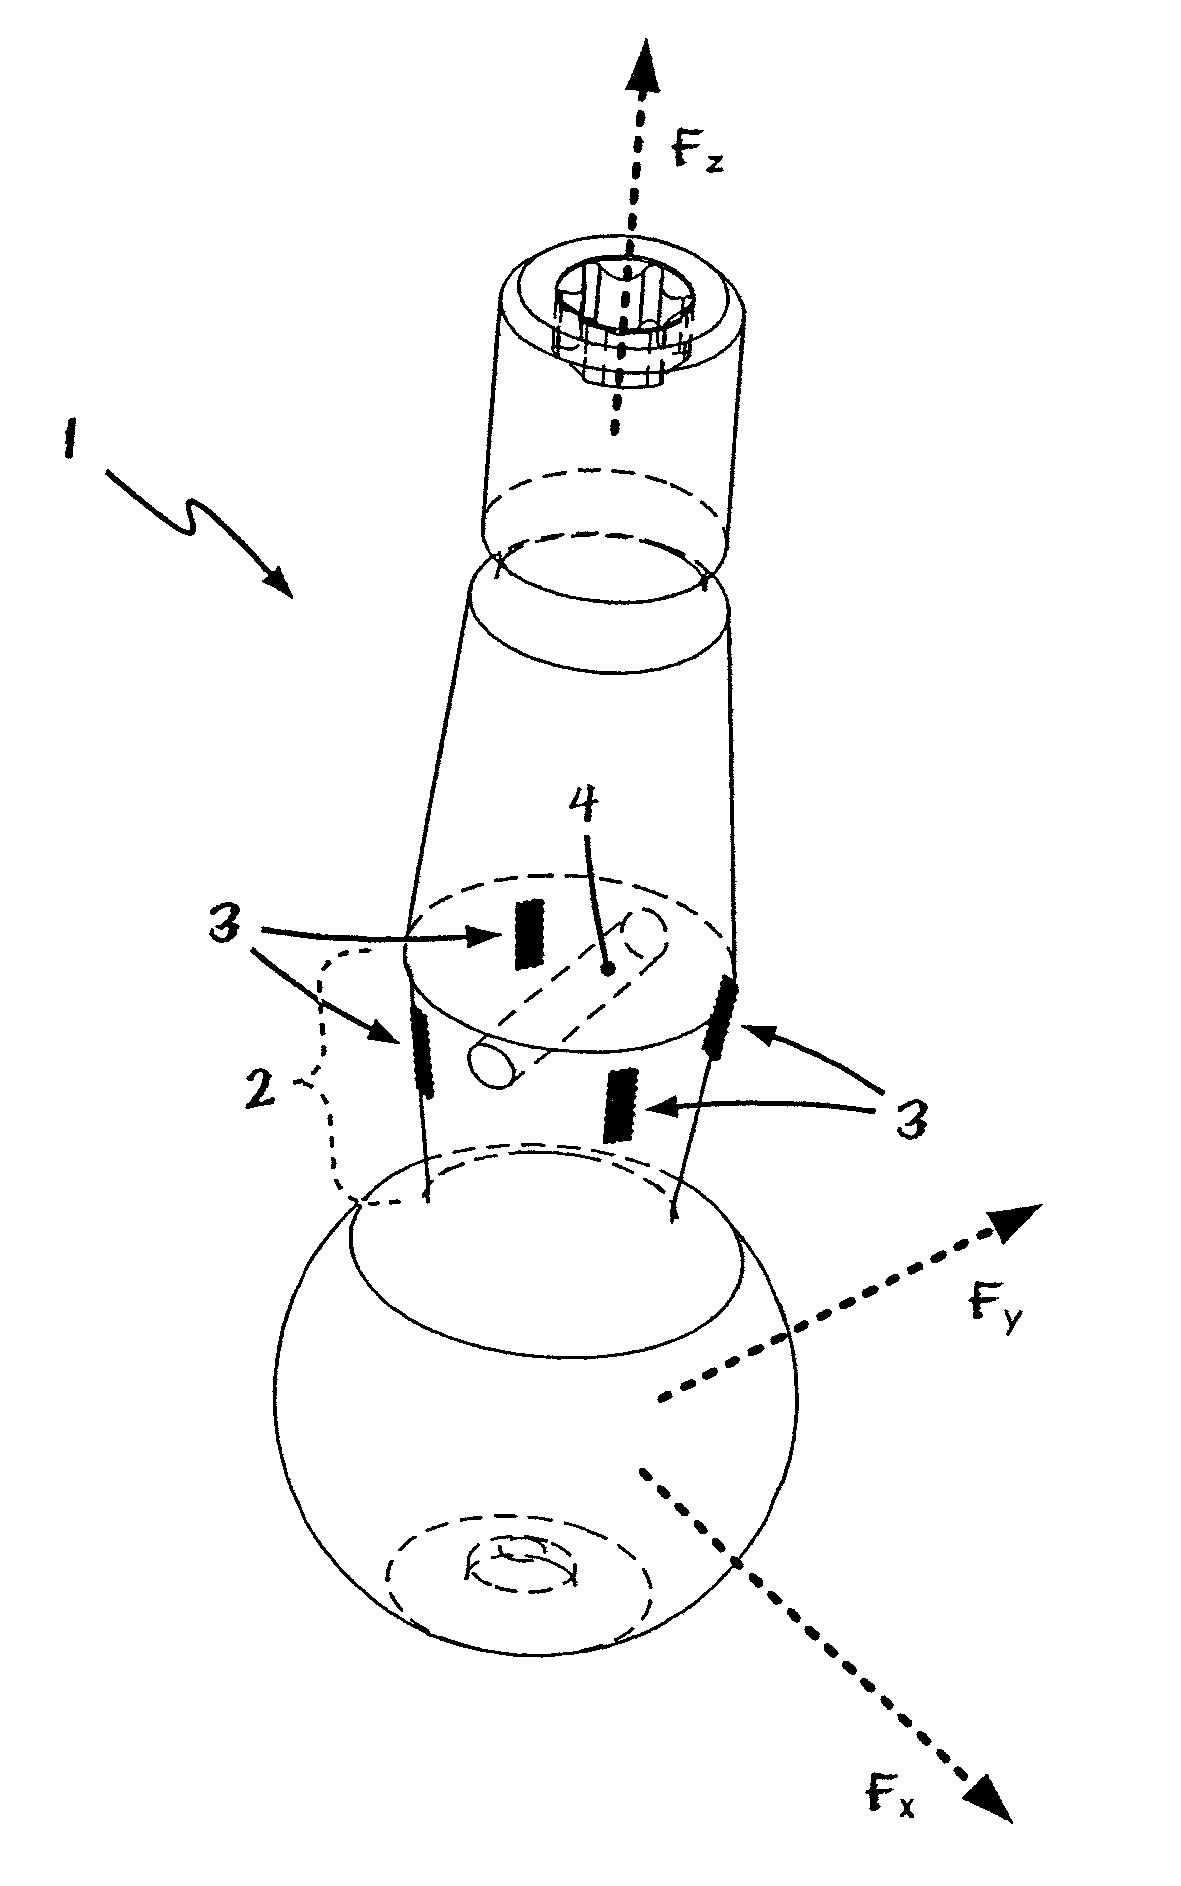 Load-sensing system with at least one ball and socket joint